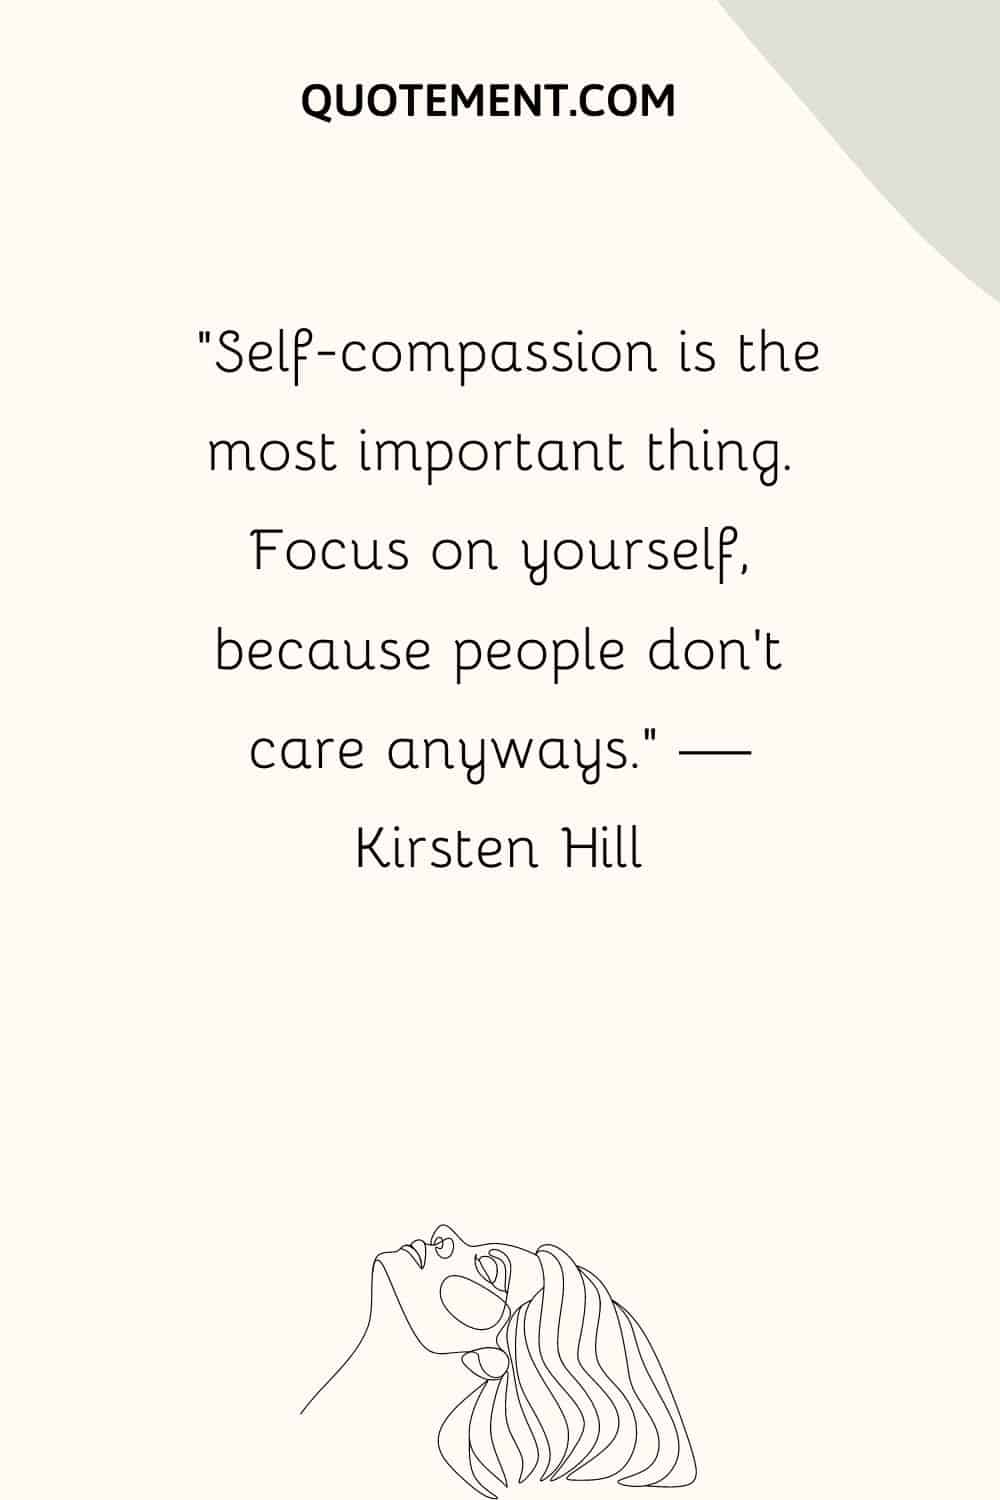 Self-compassion is the most important thing